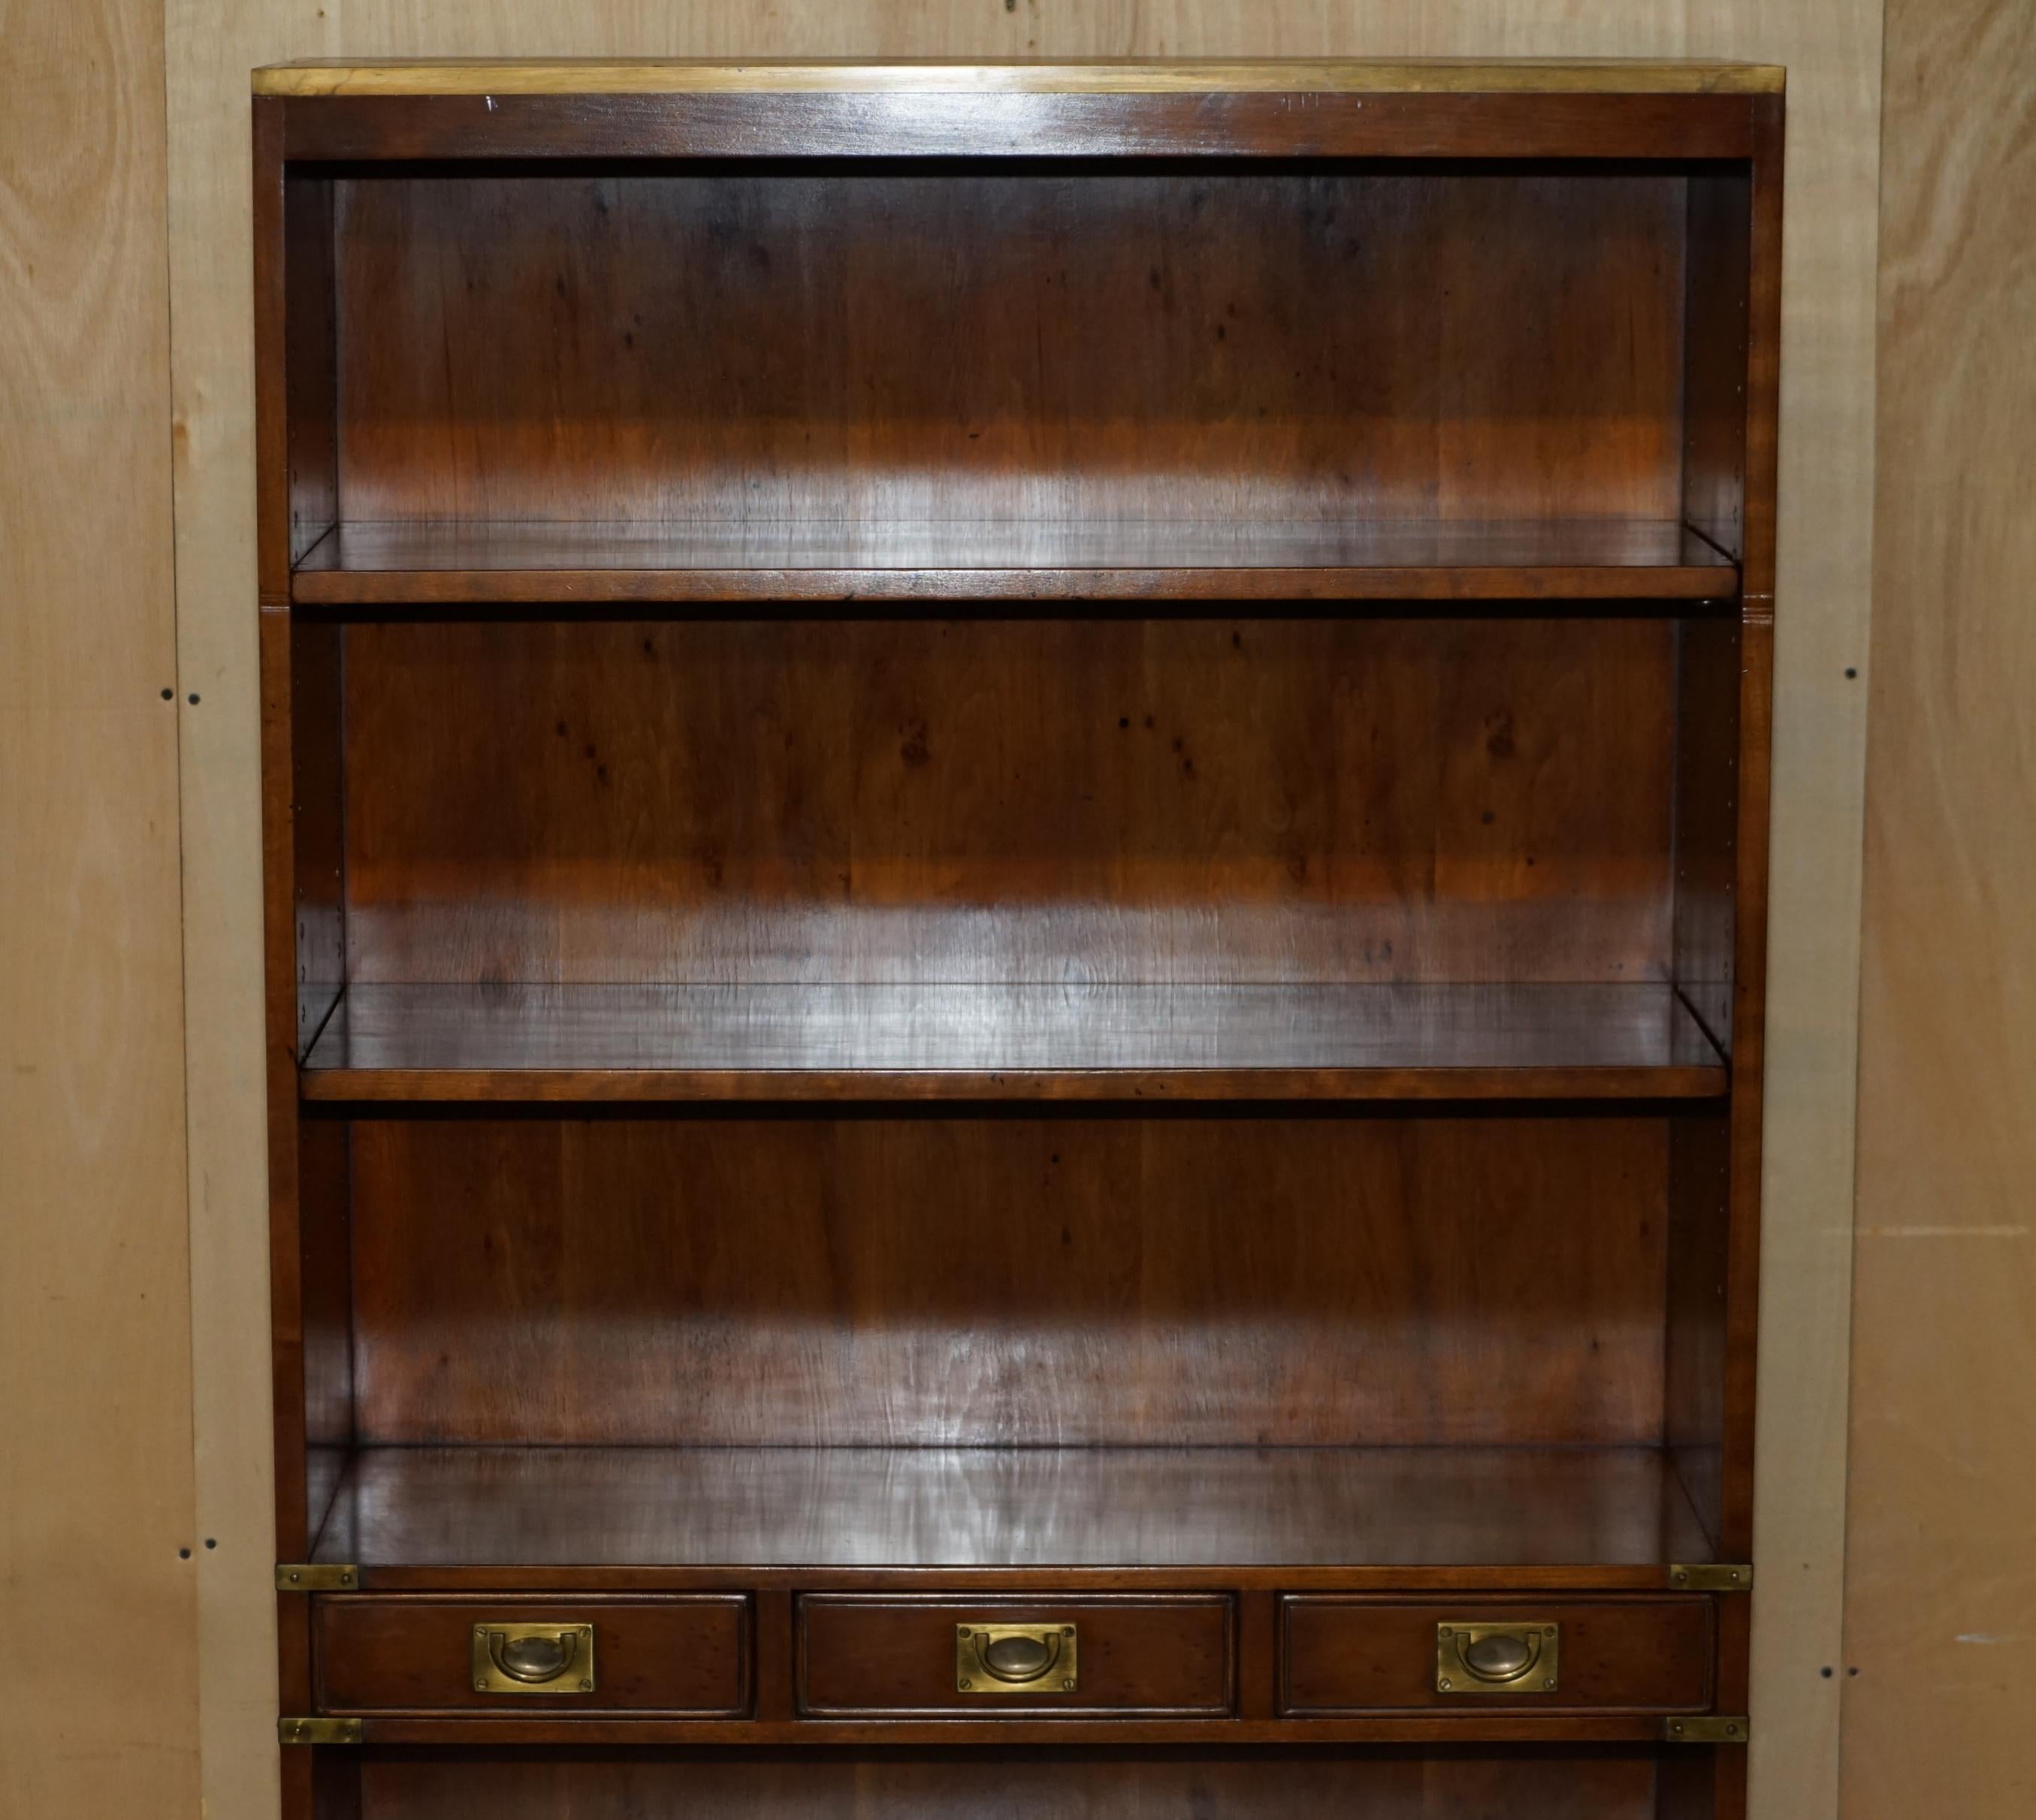 Campaign HARRODS KENNEDY THREE DRAWER BURR YEW WOOD & BRASS MiLITARY CAMPAIGN BOOKCASE